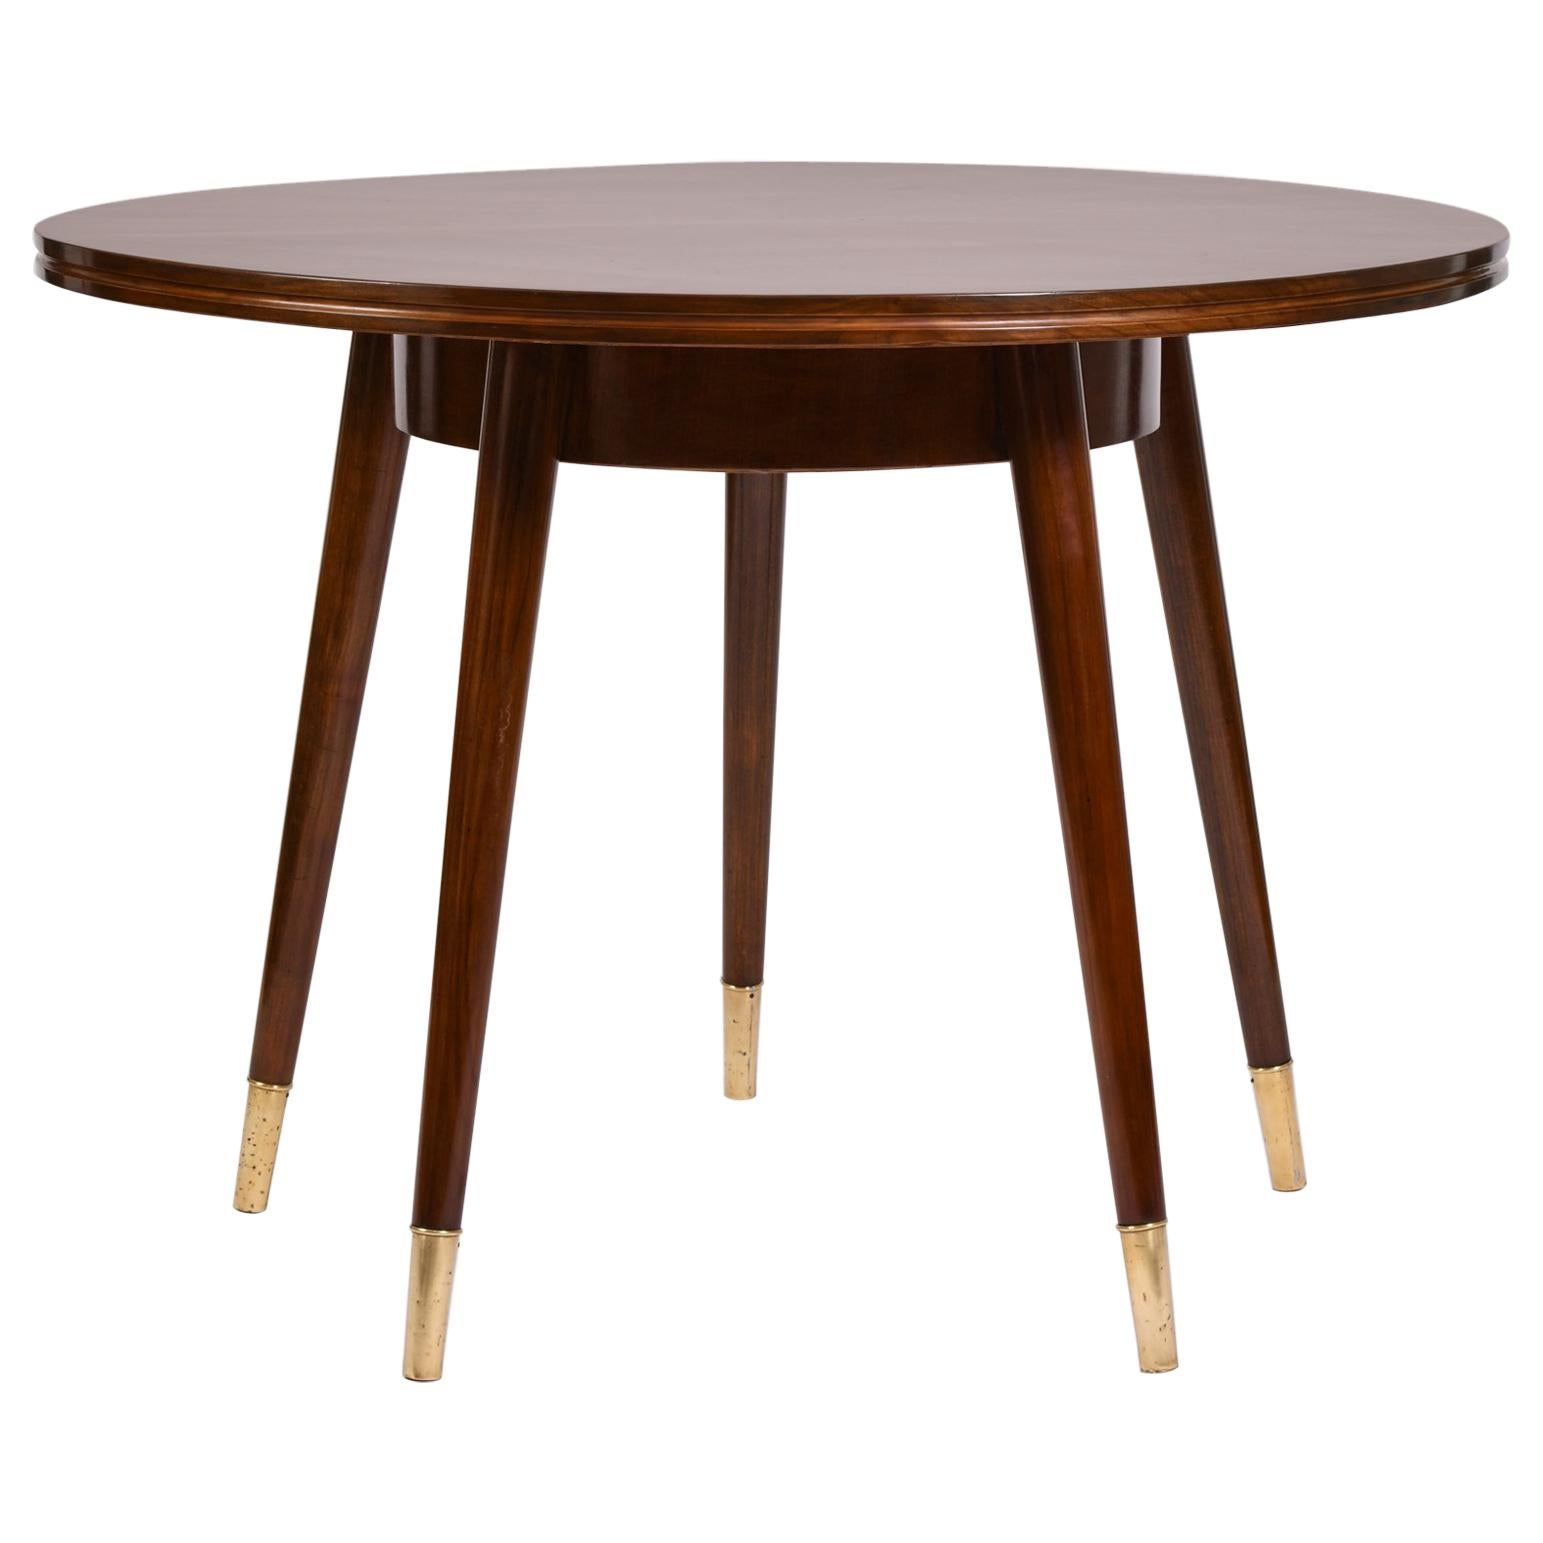 Circular Sunburst Table with Five Legs and Brass Sabots